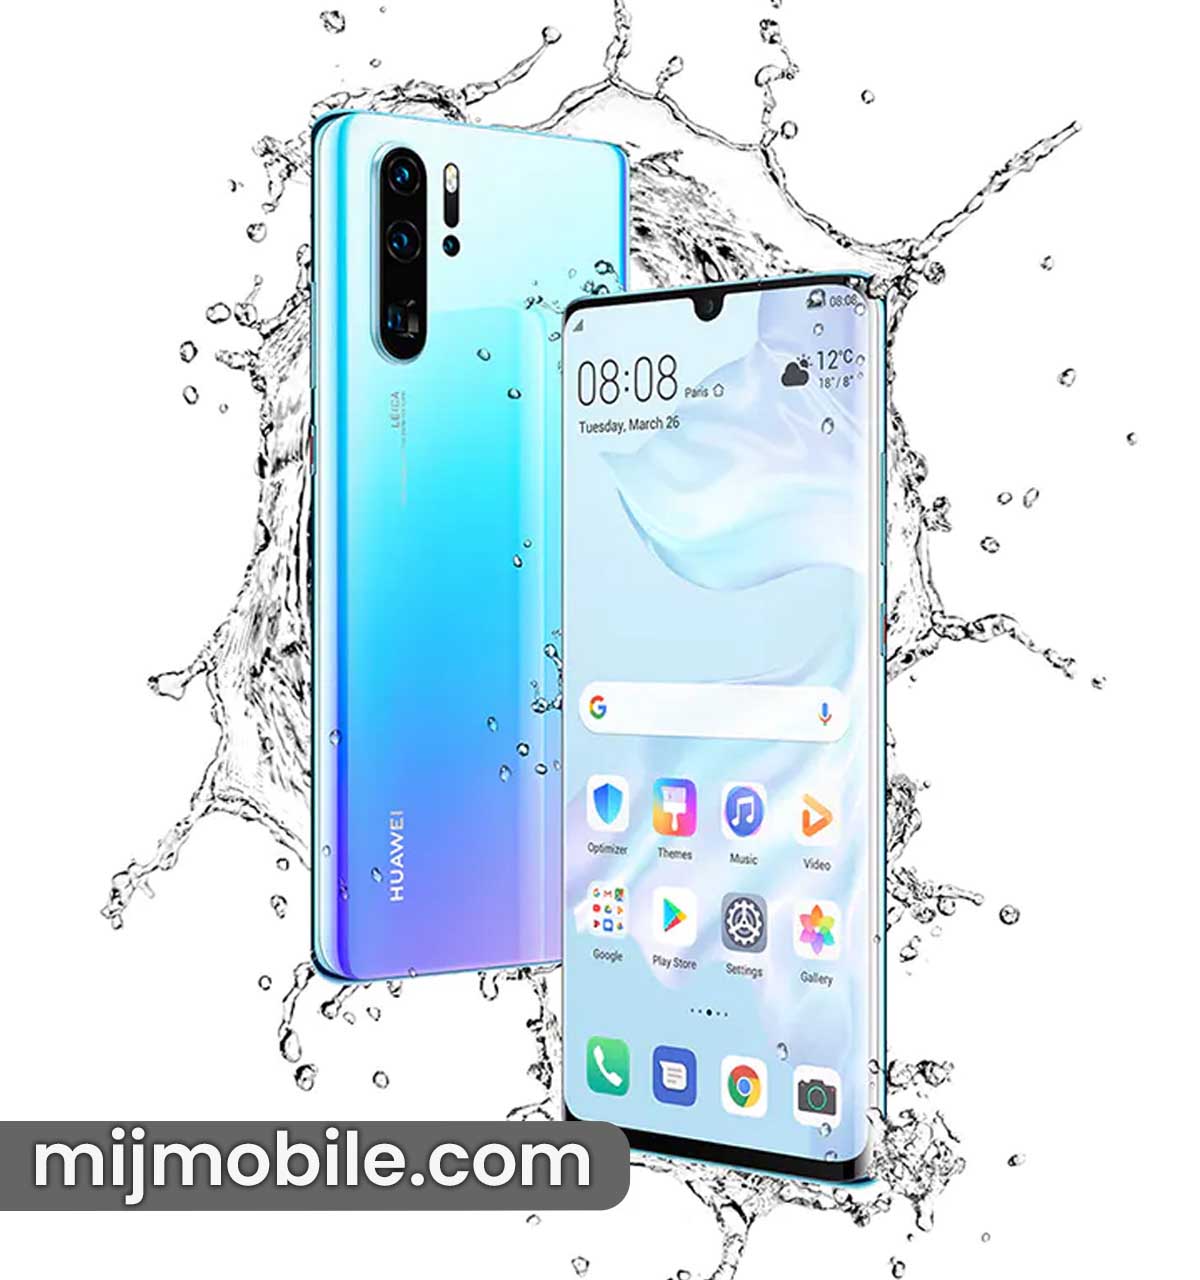 Huawei P30 Pro Price in Pakistan & Specifications Huawei P30 Pro Price in Pakistan